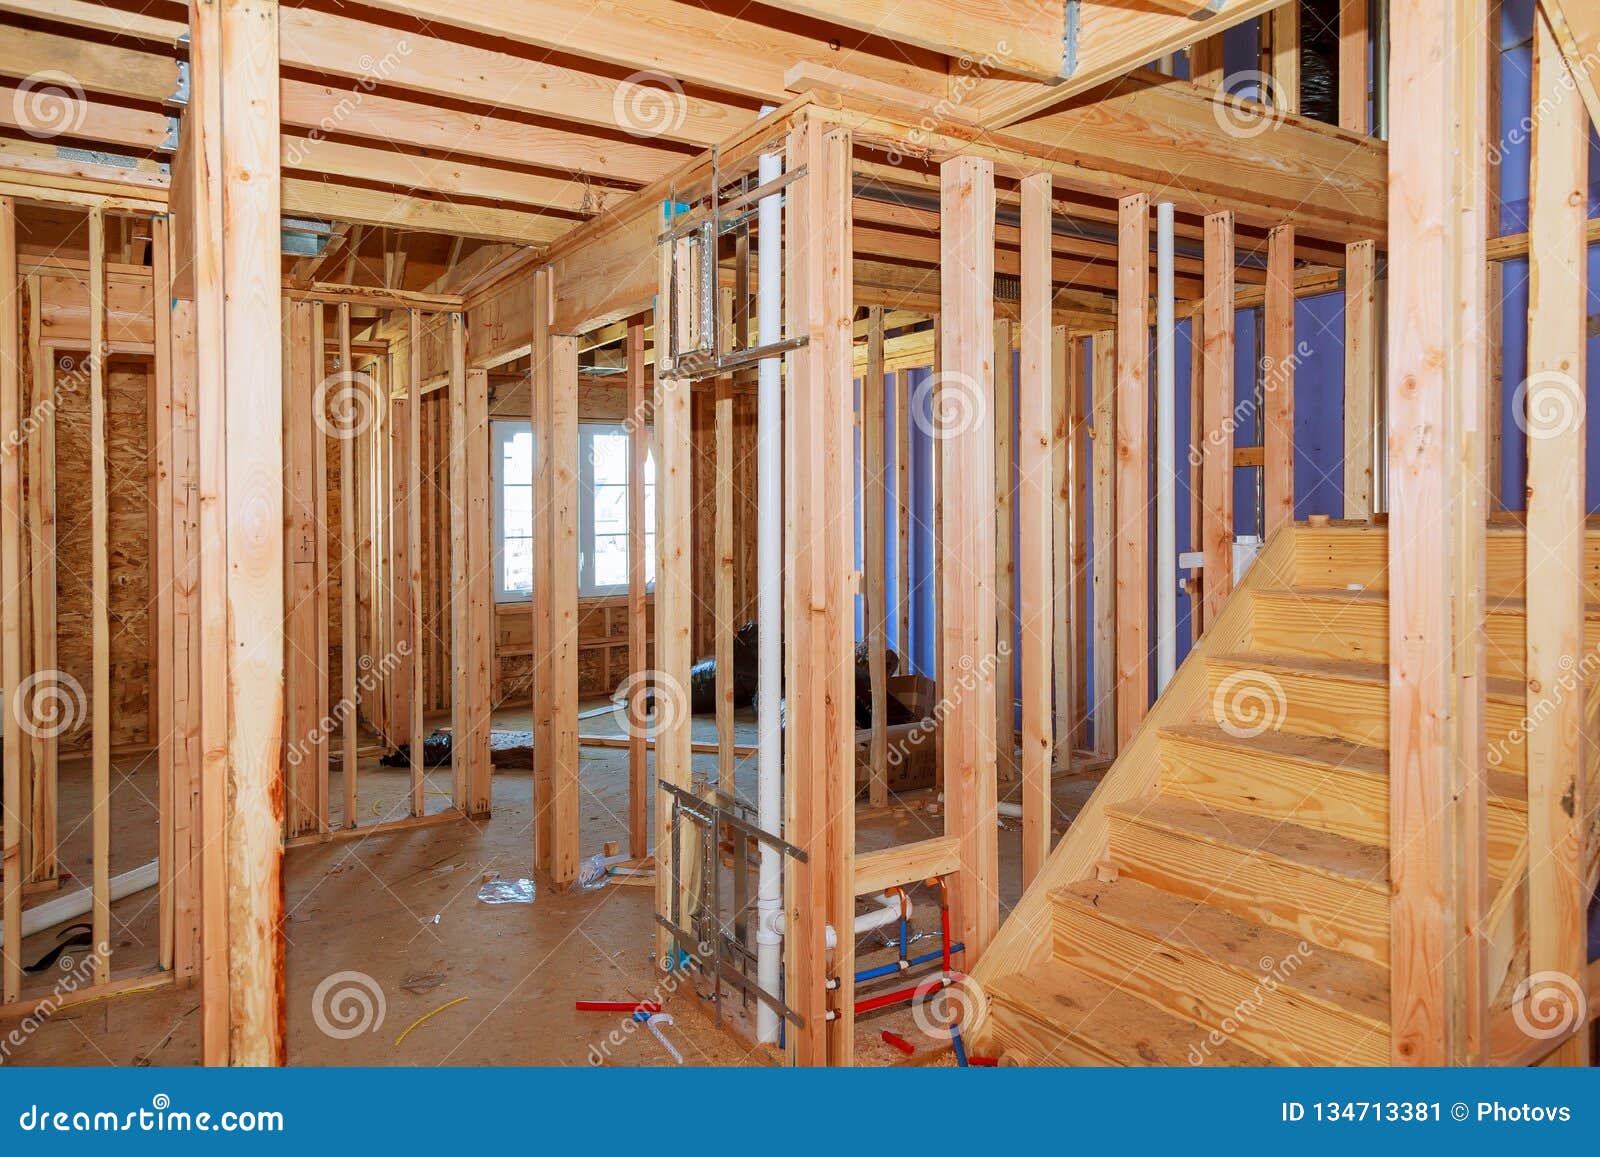 Wood Framing Work In Progress With Wood Framing Walls And